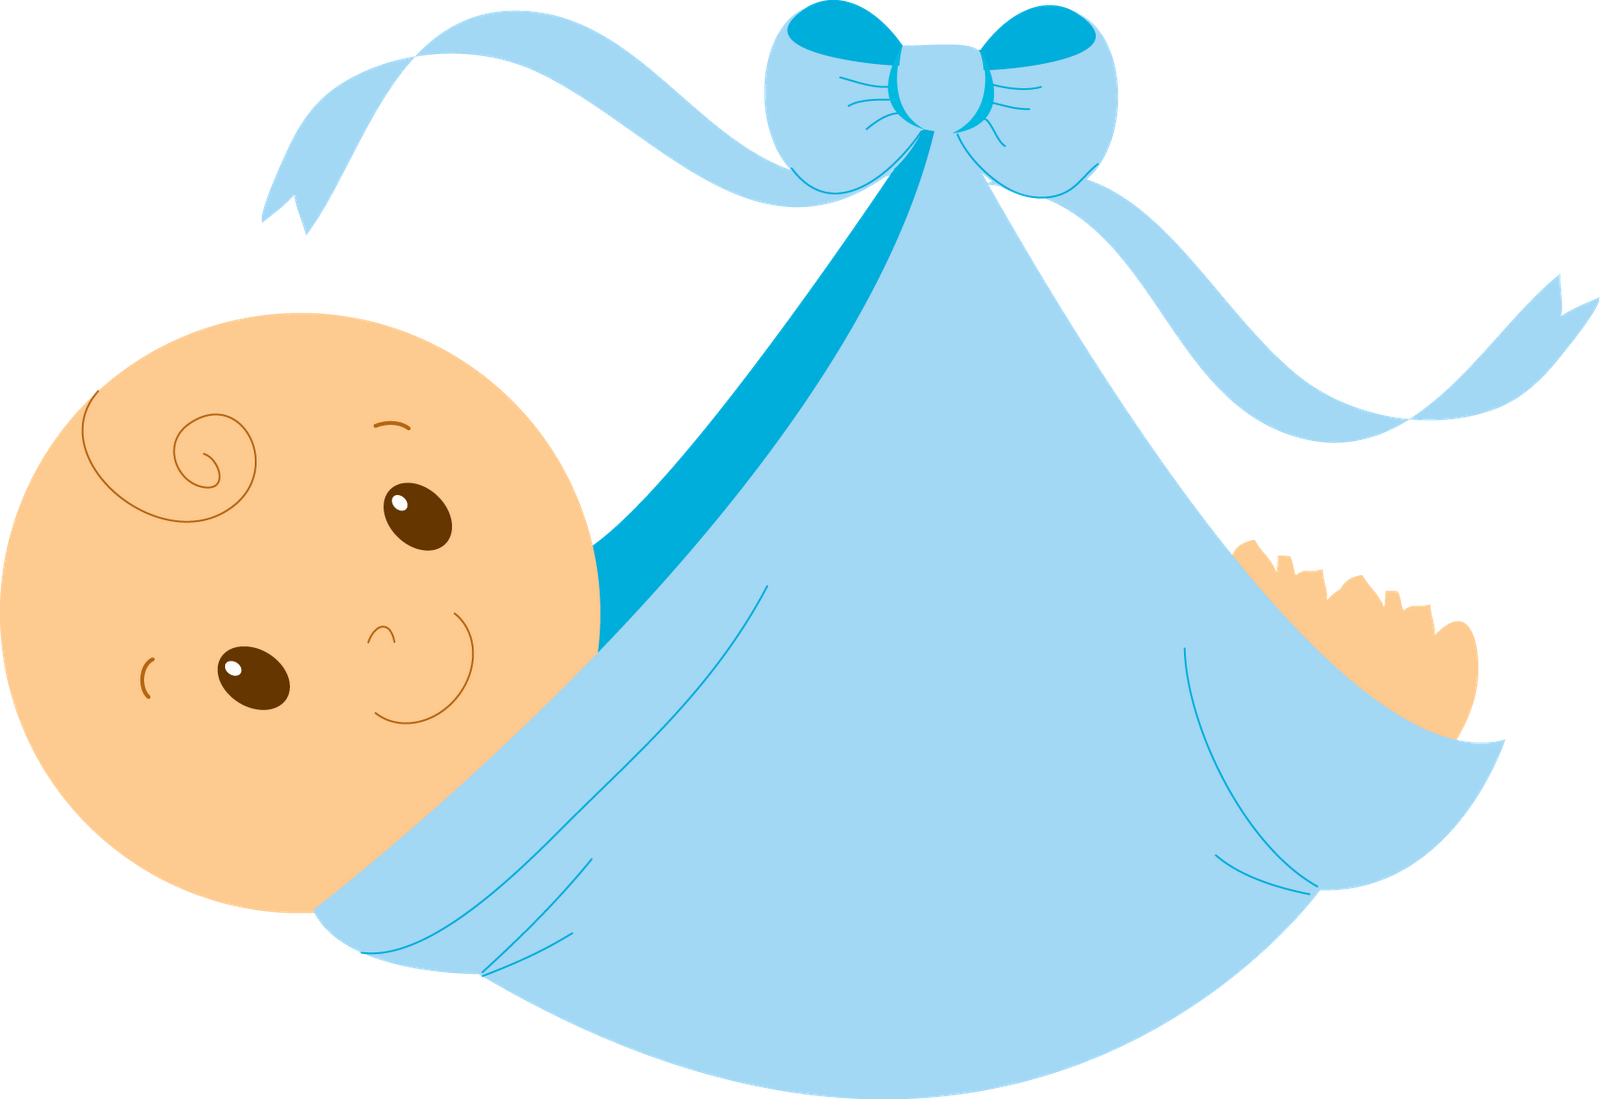 Newborn baby clipart images